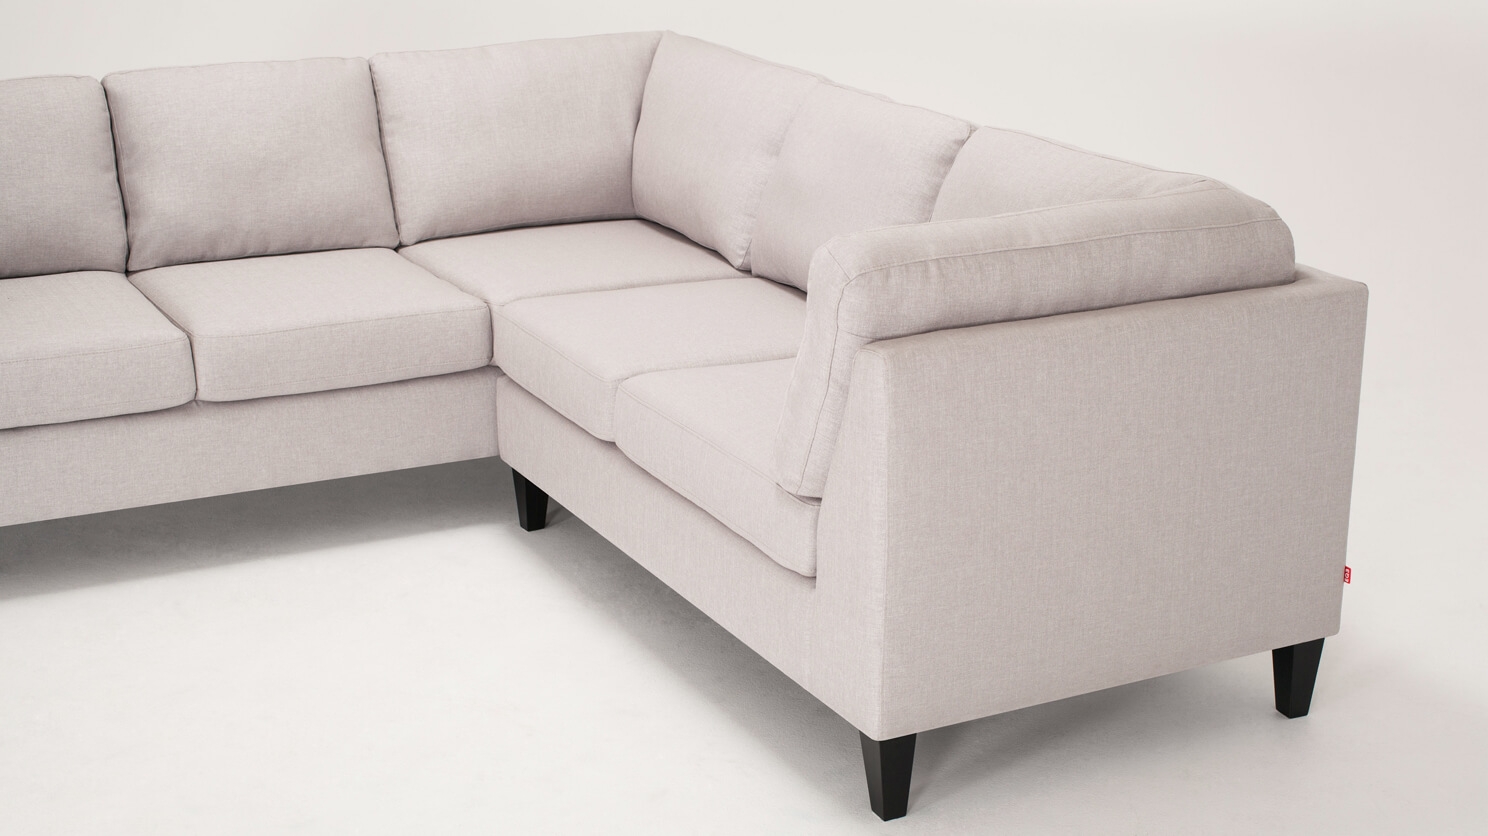 eq3 sectional sofa bed